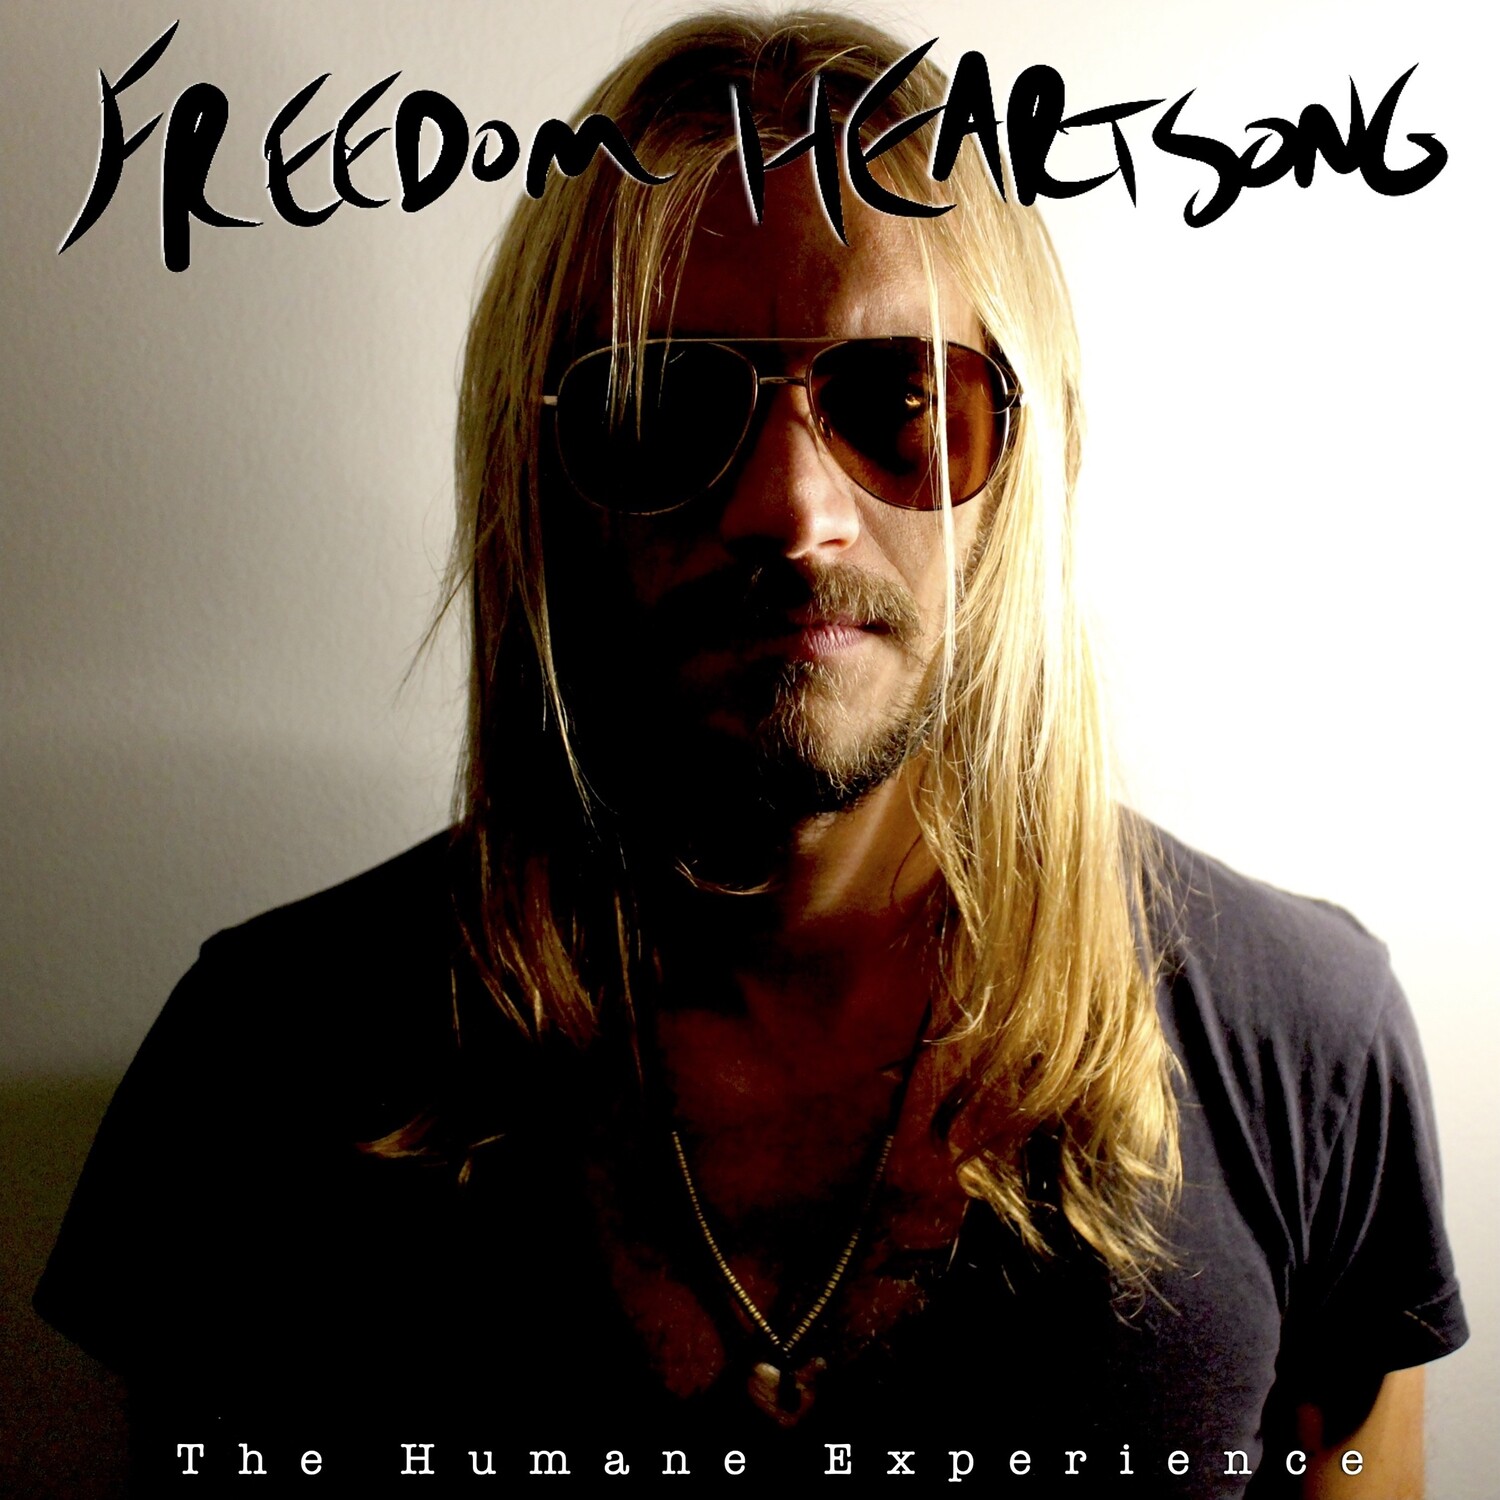 The Humane Experience by Freedom Heartsong [CD]